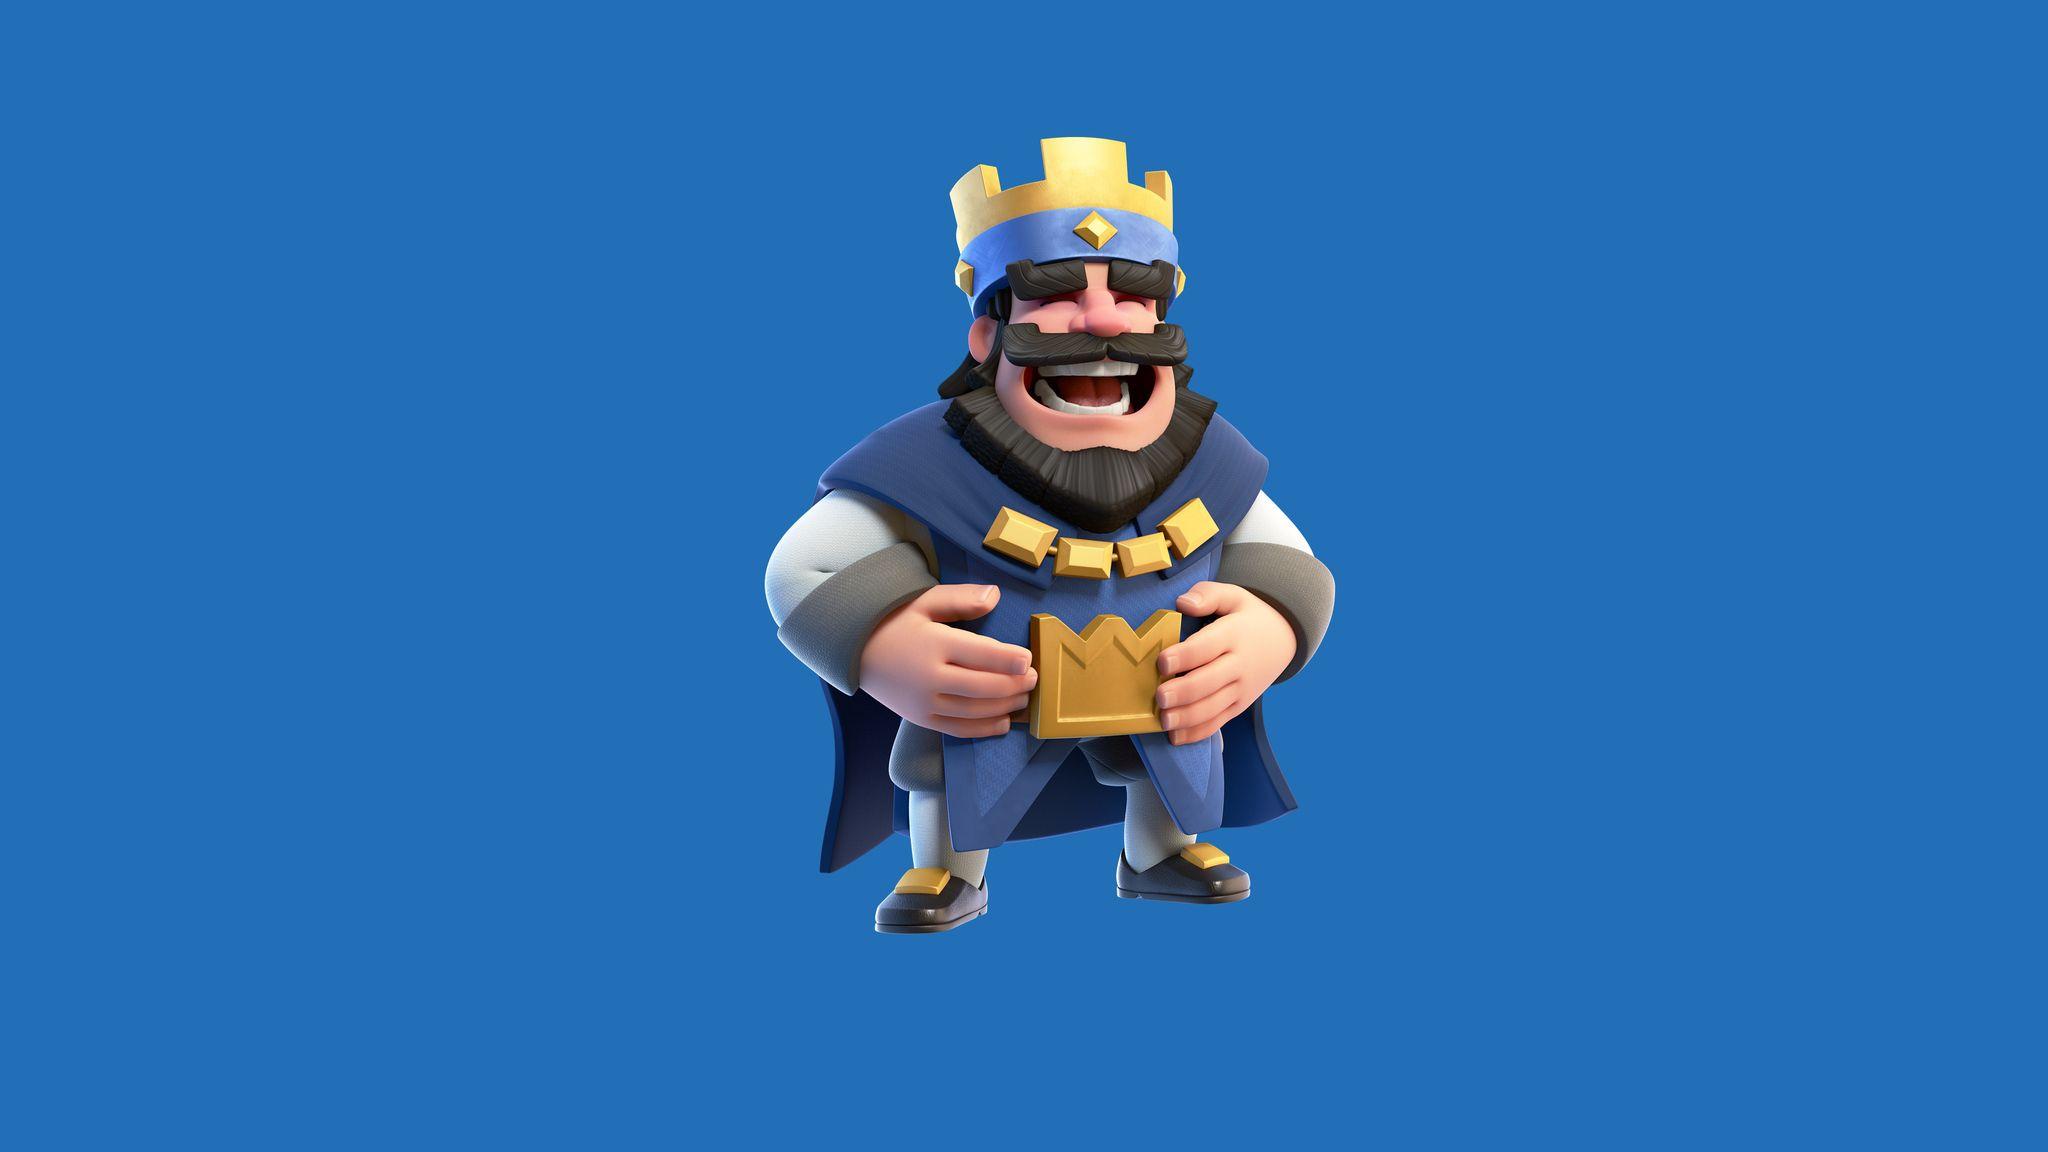 Download Clash Royale Supercell Game HD Wallpapers In